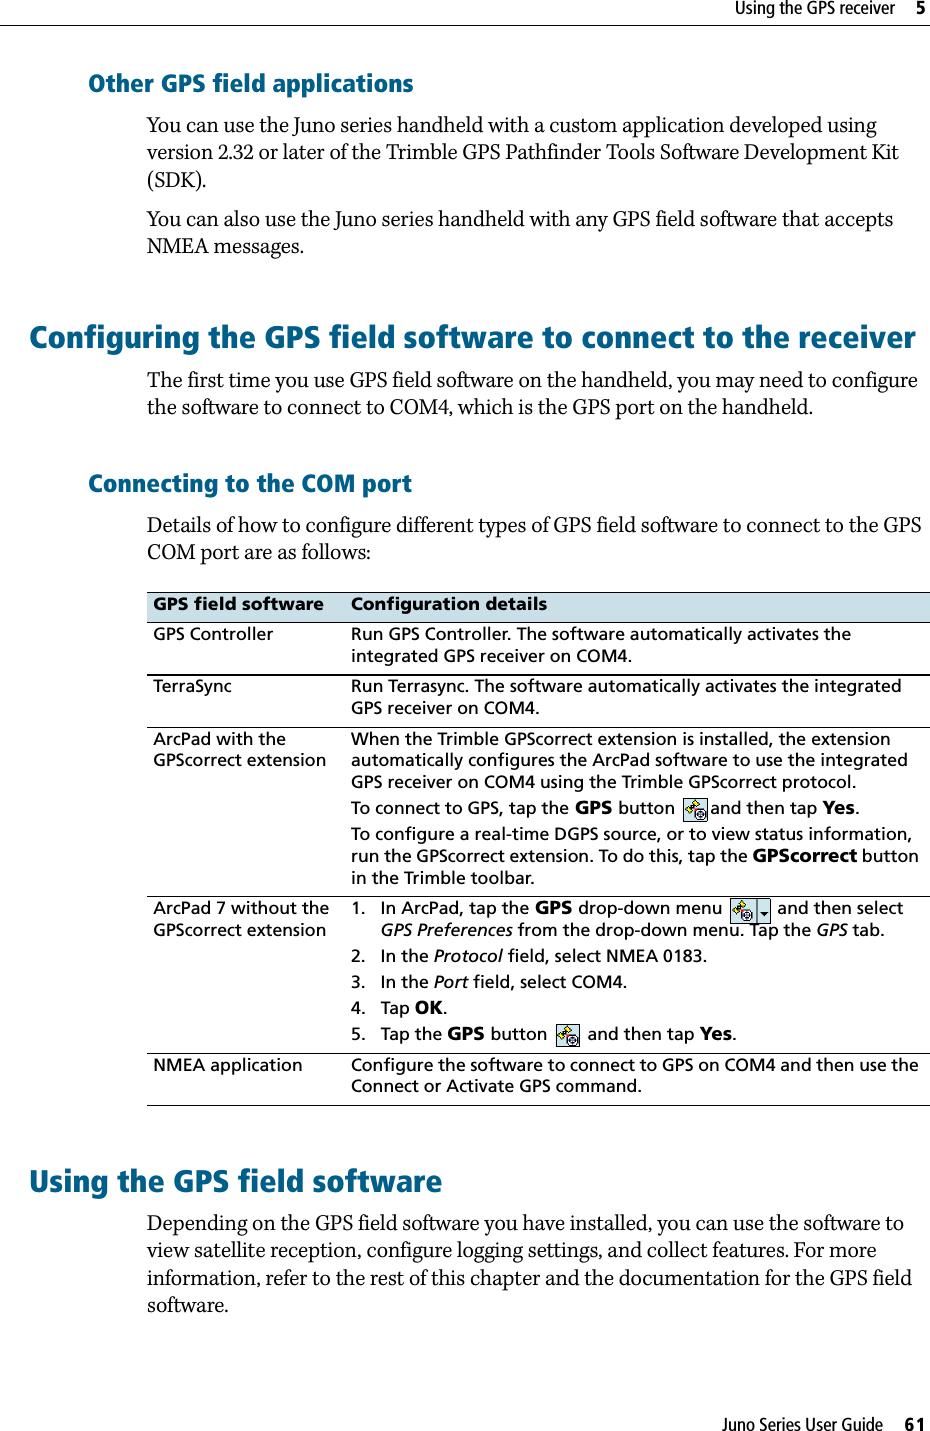 Juno Series User Guide     61Using the GPS receiver     5Other GPS field applicationsYou can use the Juno series handheld with a custom application developed using version 2.32 or later of the Trimble GPS Pathfinder Tools Software Development Kit (SDK).You can also use the Juno series handheld with any GPS field software that accepts NMEA messages.Configuring the GPS field software to connect to the receiverThe first time you use GPS field software on the handheld, you may need to configure the software to connect to COM4, which is the GPS port on the handheld.Connecting to the COM portDetails of how to configure different types of GPS field software to connect to the GPS COM port are as follows: Using the GPS field softwareDepending on the GPS field software you have installed, you can use the software to view satellite reception, configure logging settings, and collect features. For more information, refer to the rest of this chapter and the documentation for the GPS field software.GPS field software Configuration detailsGPS Controller Run GPS Controller. The software automatically activates the integrated GPS receiver on COM4. TerraSync Run Terrasync. The software automatically activates the integrated GPS receiver on COM4.ArcPad with the GPScorrect extensionWhen the Trimble GPScorrect extension is installed, the extension automatically configures the ArcPad software to use the integrated GPS receiver on COM4 using the Trimble GPScorrect protocol. To connect to GPS, tap the GPS button and then tap Yes.To configure a real-time DGPS source, or to view status information, run the GPScorrect extension. To do this, tap the GPScorrect button in the Trimble toolbar.ArcPad 7 without the GPScorrect extension1. In ArcPad, tap the GPS drop-down menu   and then select GPS Preferences from the drop-down menu. Tap the GPS tab.2. In the Protocol field, select NMEA 0183.3. In the Port field, select COM4.4. Tap OK.5. Tap the GPS button   and then tap Yes. NMEA application Configure the software to connect to GPS on COM4 and then use the Connect or Activate GPS command.